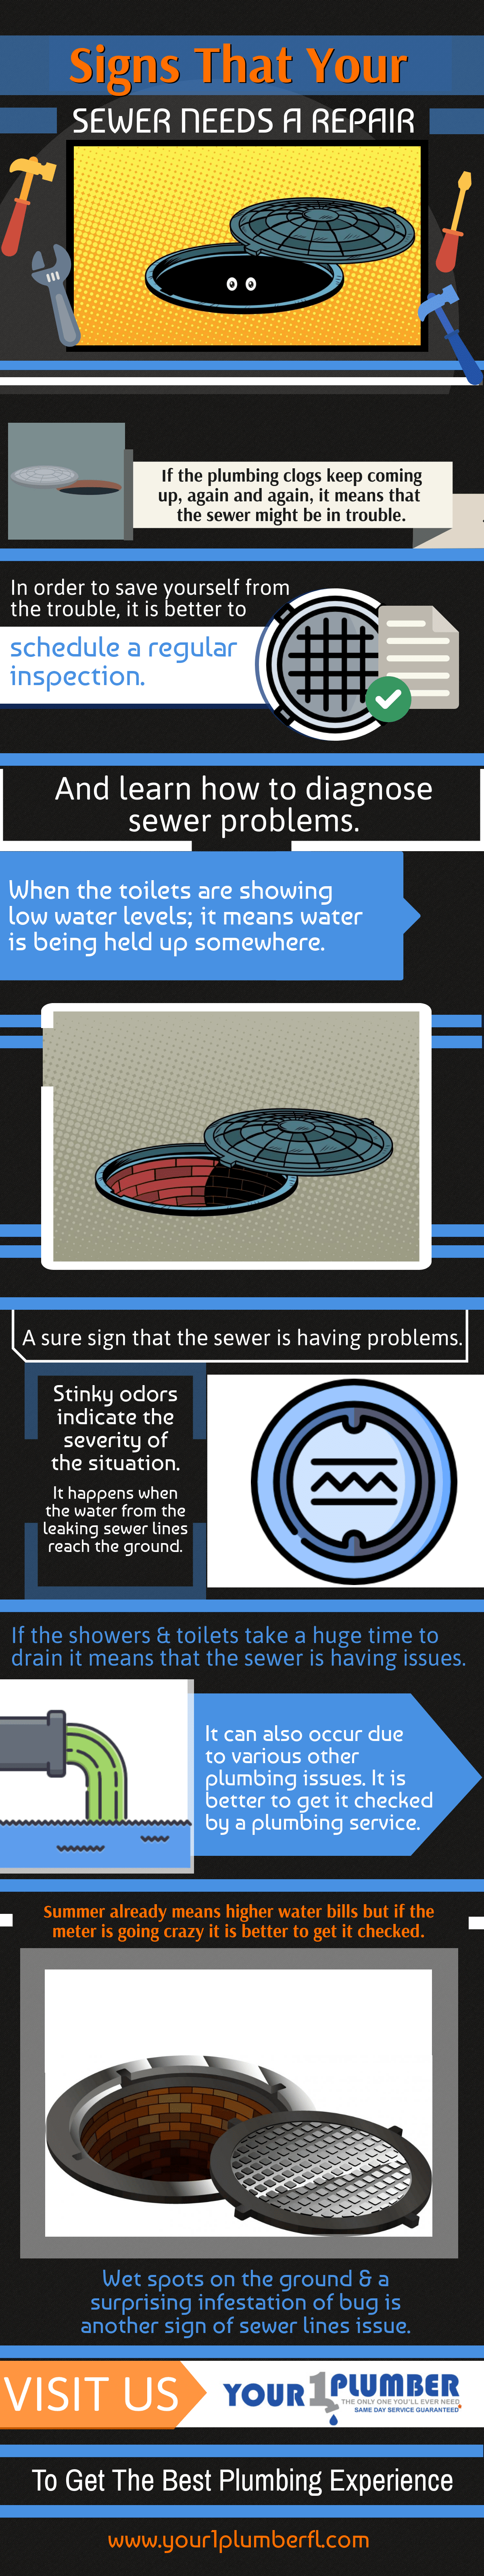 signs-that-your-sewer-need-a-repair